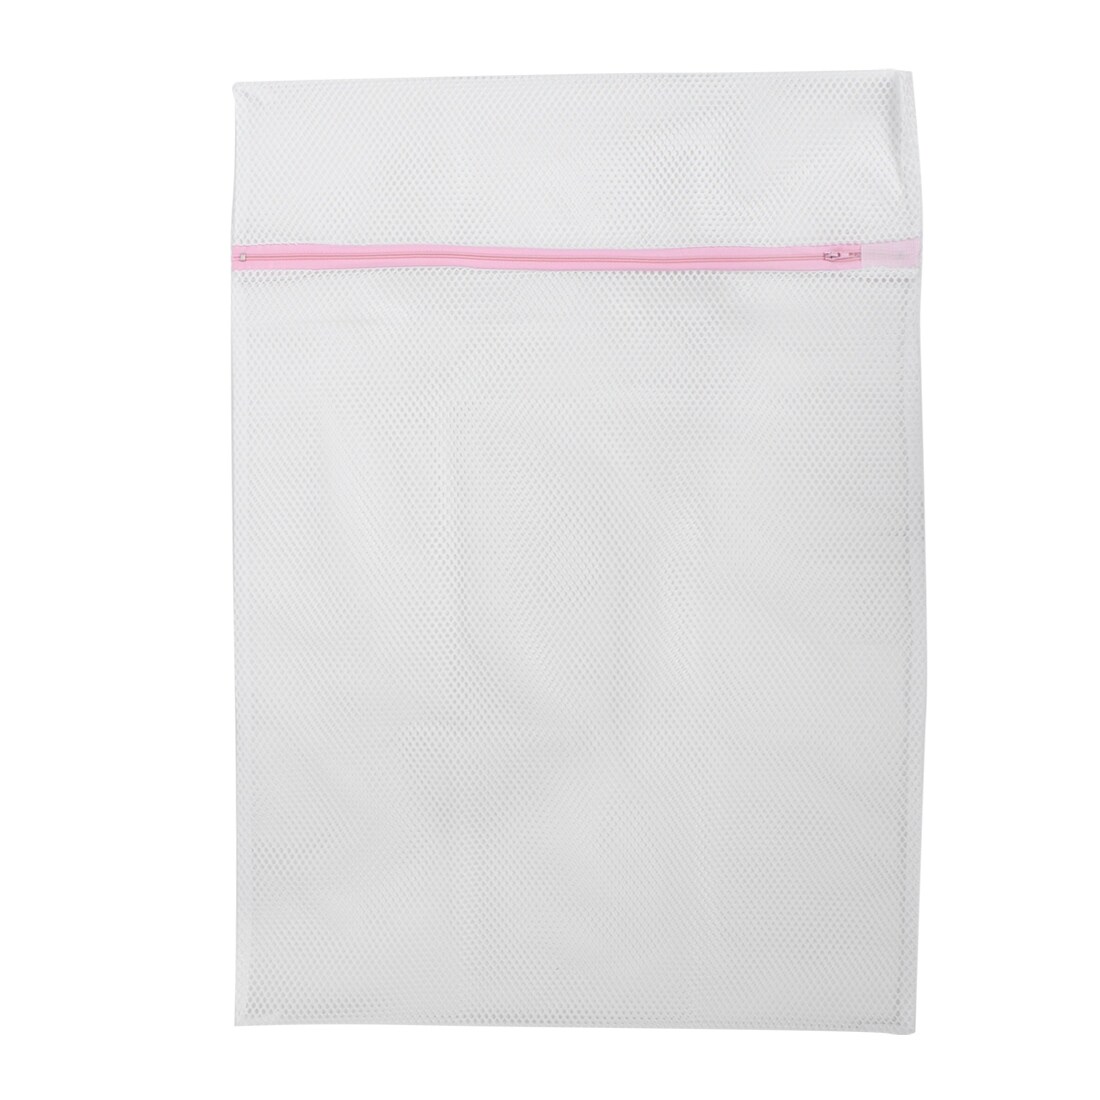 Household Underwear Lingerie Laundry Clothes Washing Bag White Pink 3 Pcs -  Bed Bath & Beyond - 17611804